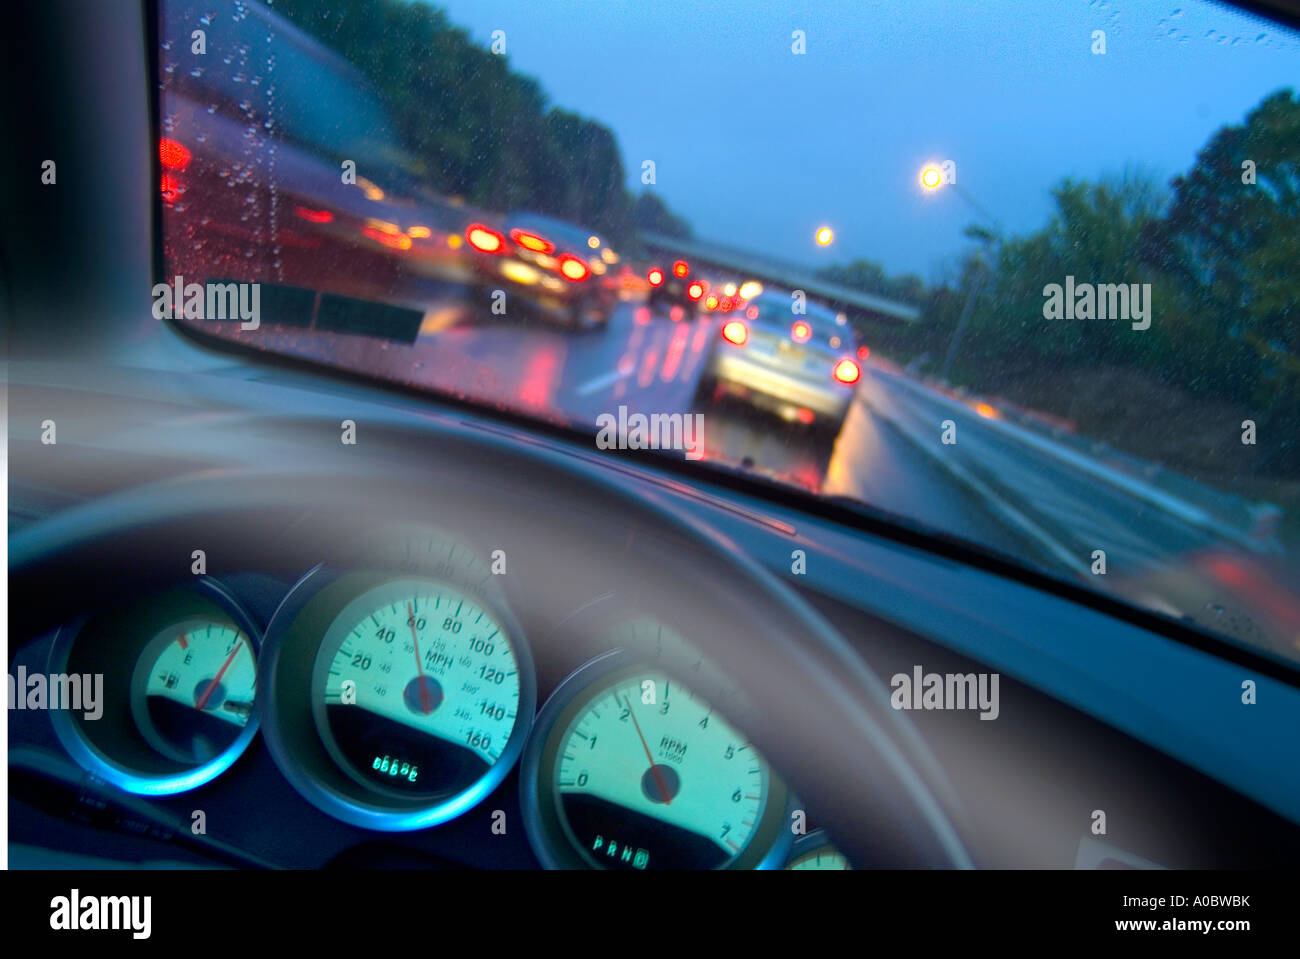 View Of Cars On Highway From Drivers Perspective With Steering Wheel, Dashboard  And Motion Blur, Philadelphia, PA USA Stock Photo